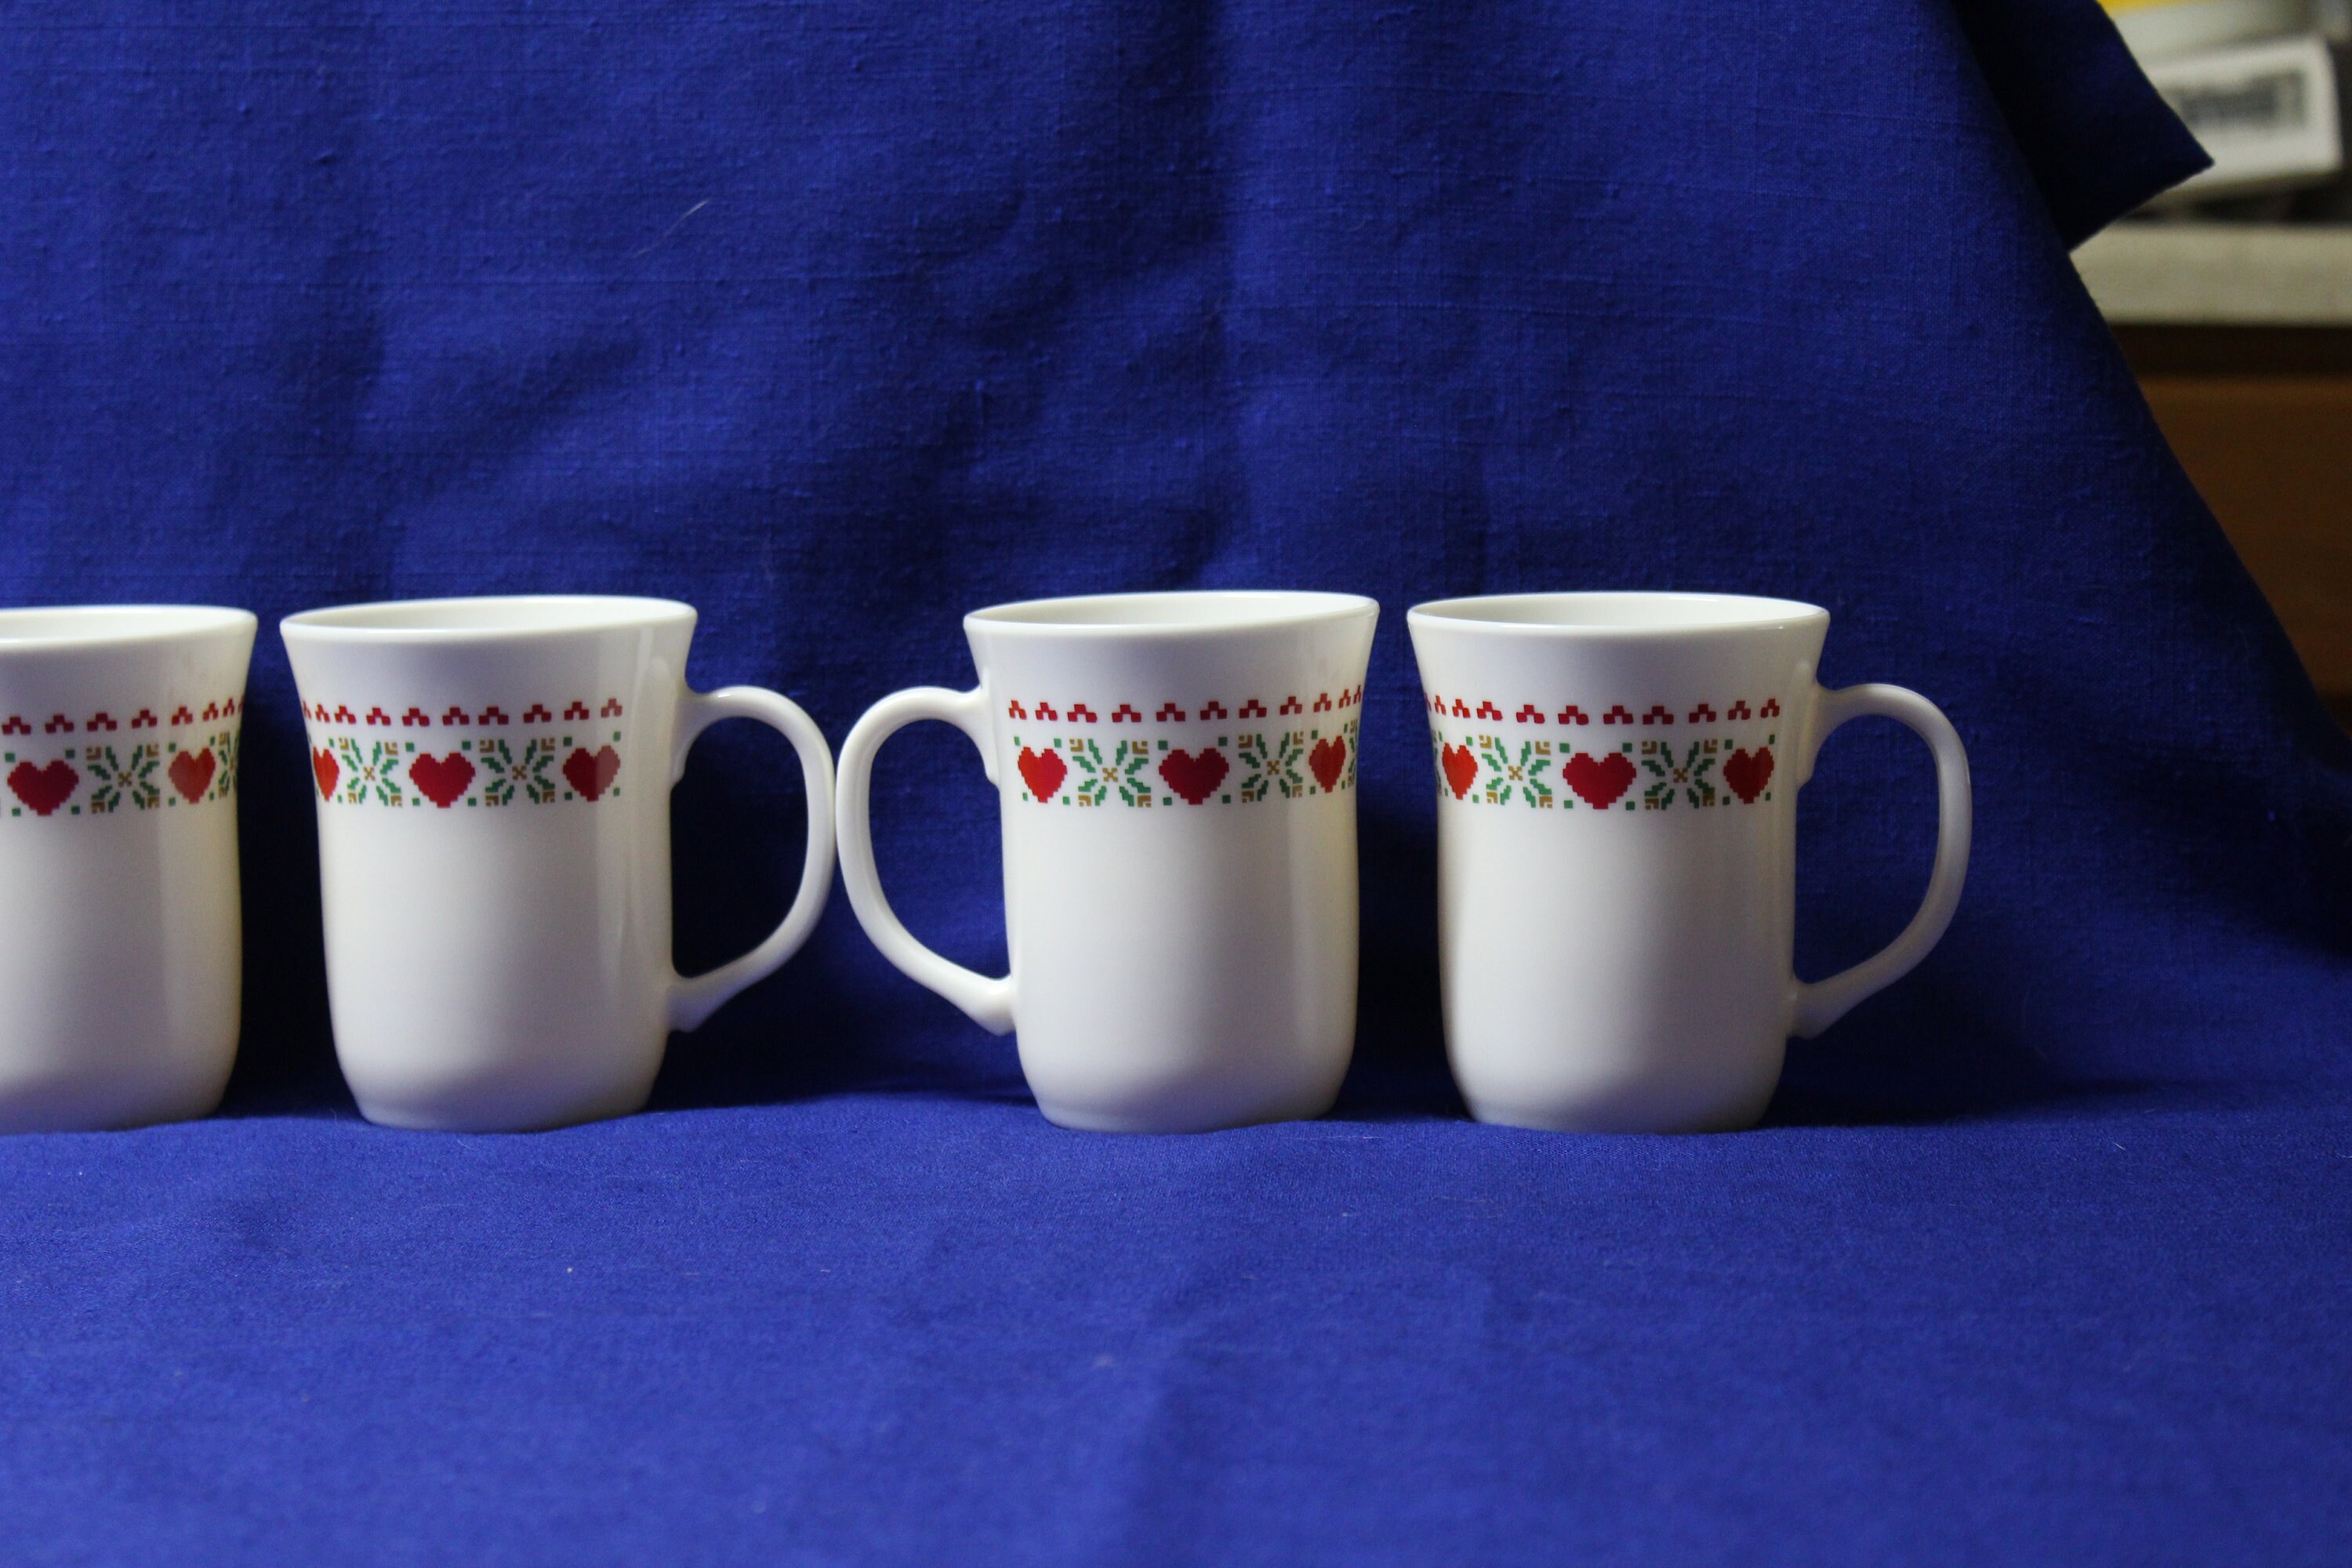 Mugs for coworkers -  France